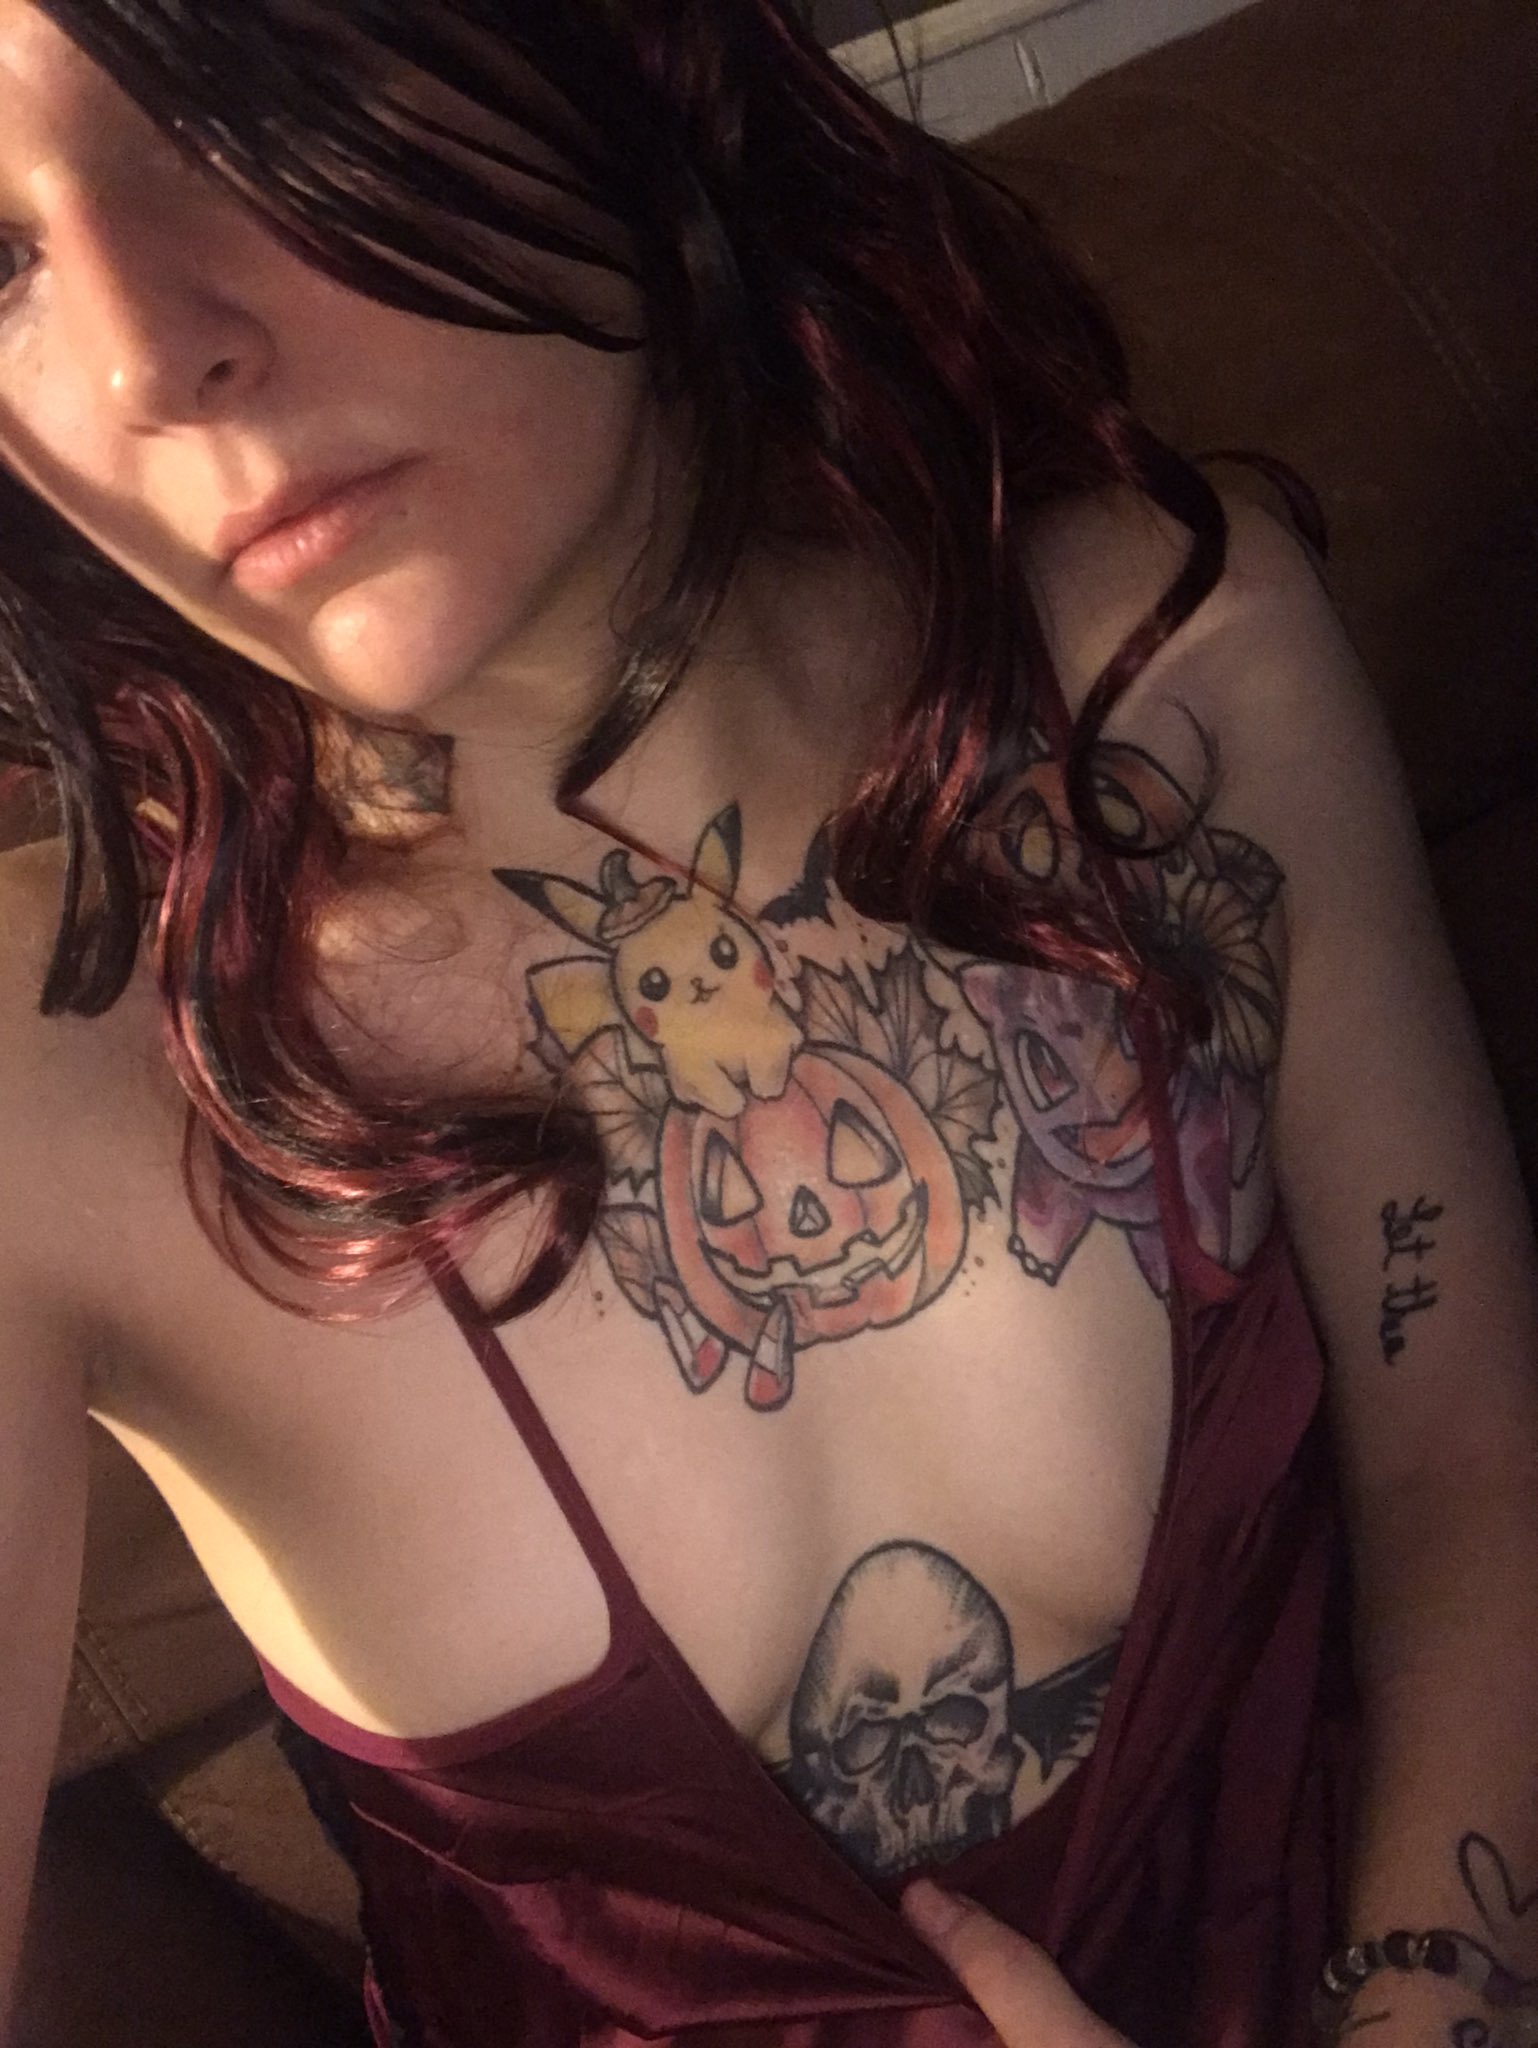 Bunnyfufuu on X: Everyone who subscribes to my OF I'm the next 24 hours  I'll match your purchase for a month if free content!  t.comAZkhPPkwr t.co5Yz9tgs6XL  X